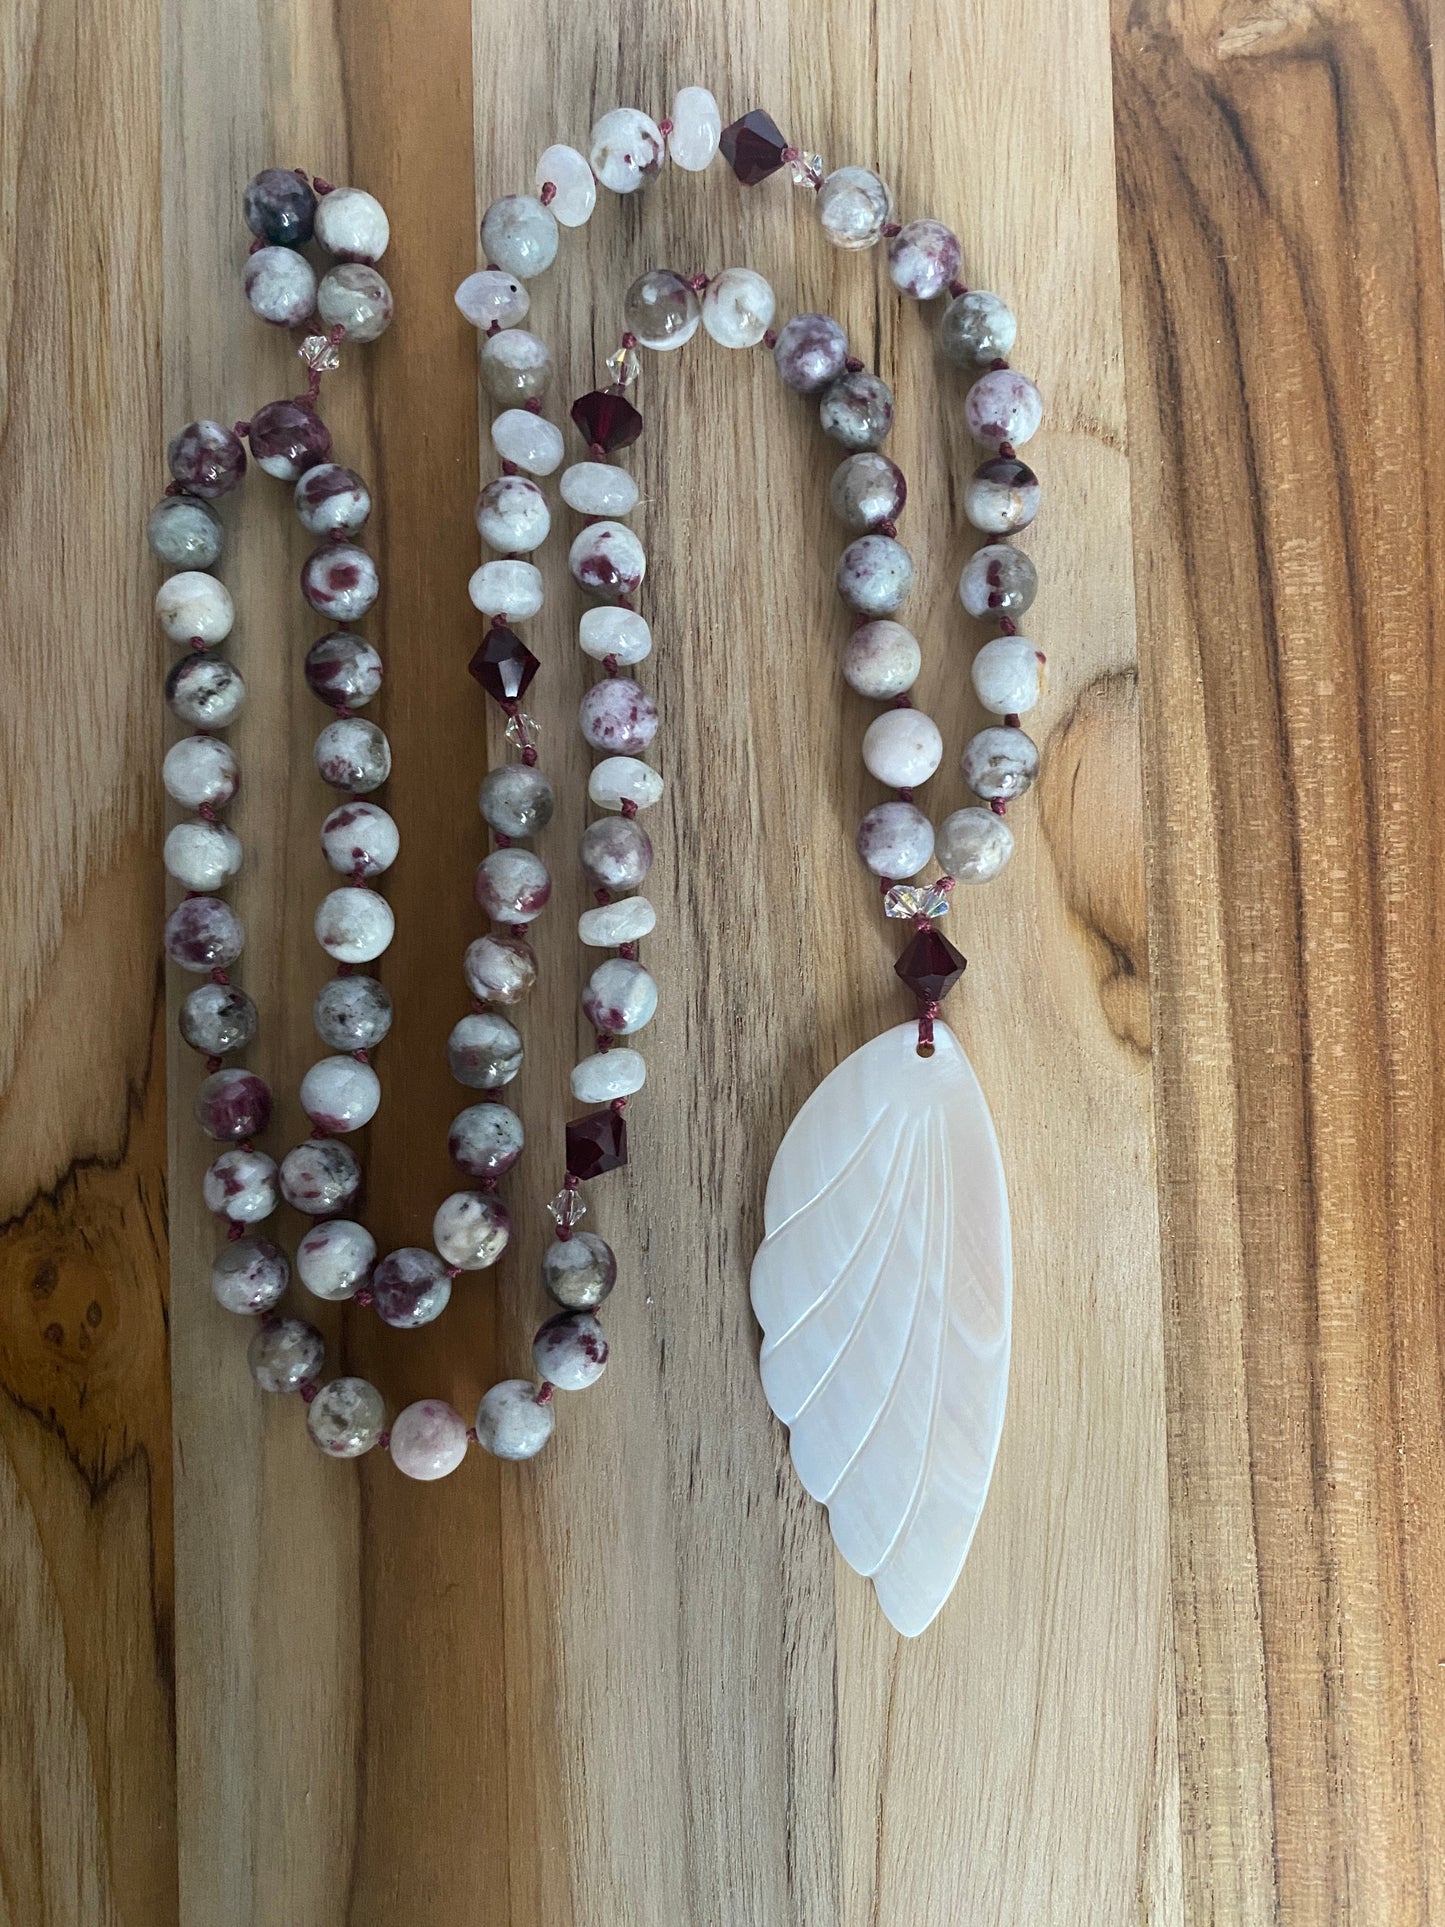 30" Long Mother of Pearl Wing Pendant Necklace with Tourmaline, Moonstone & Crystal Beads